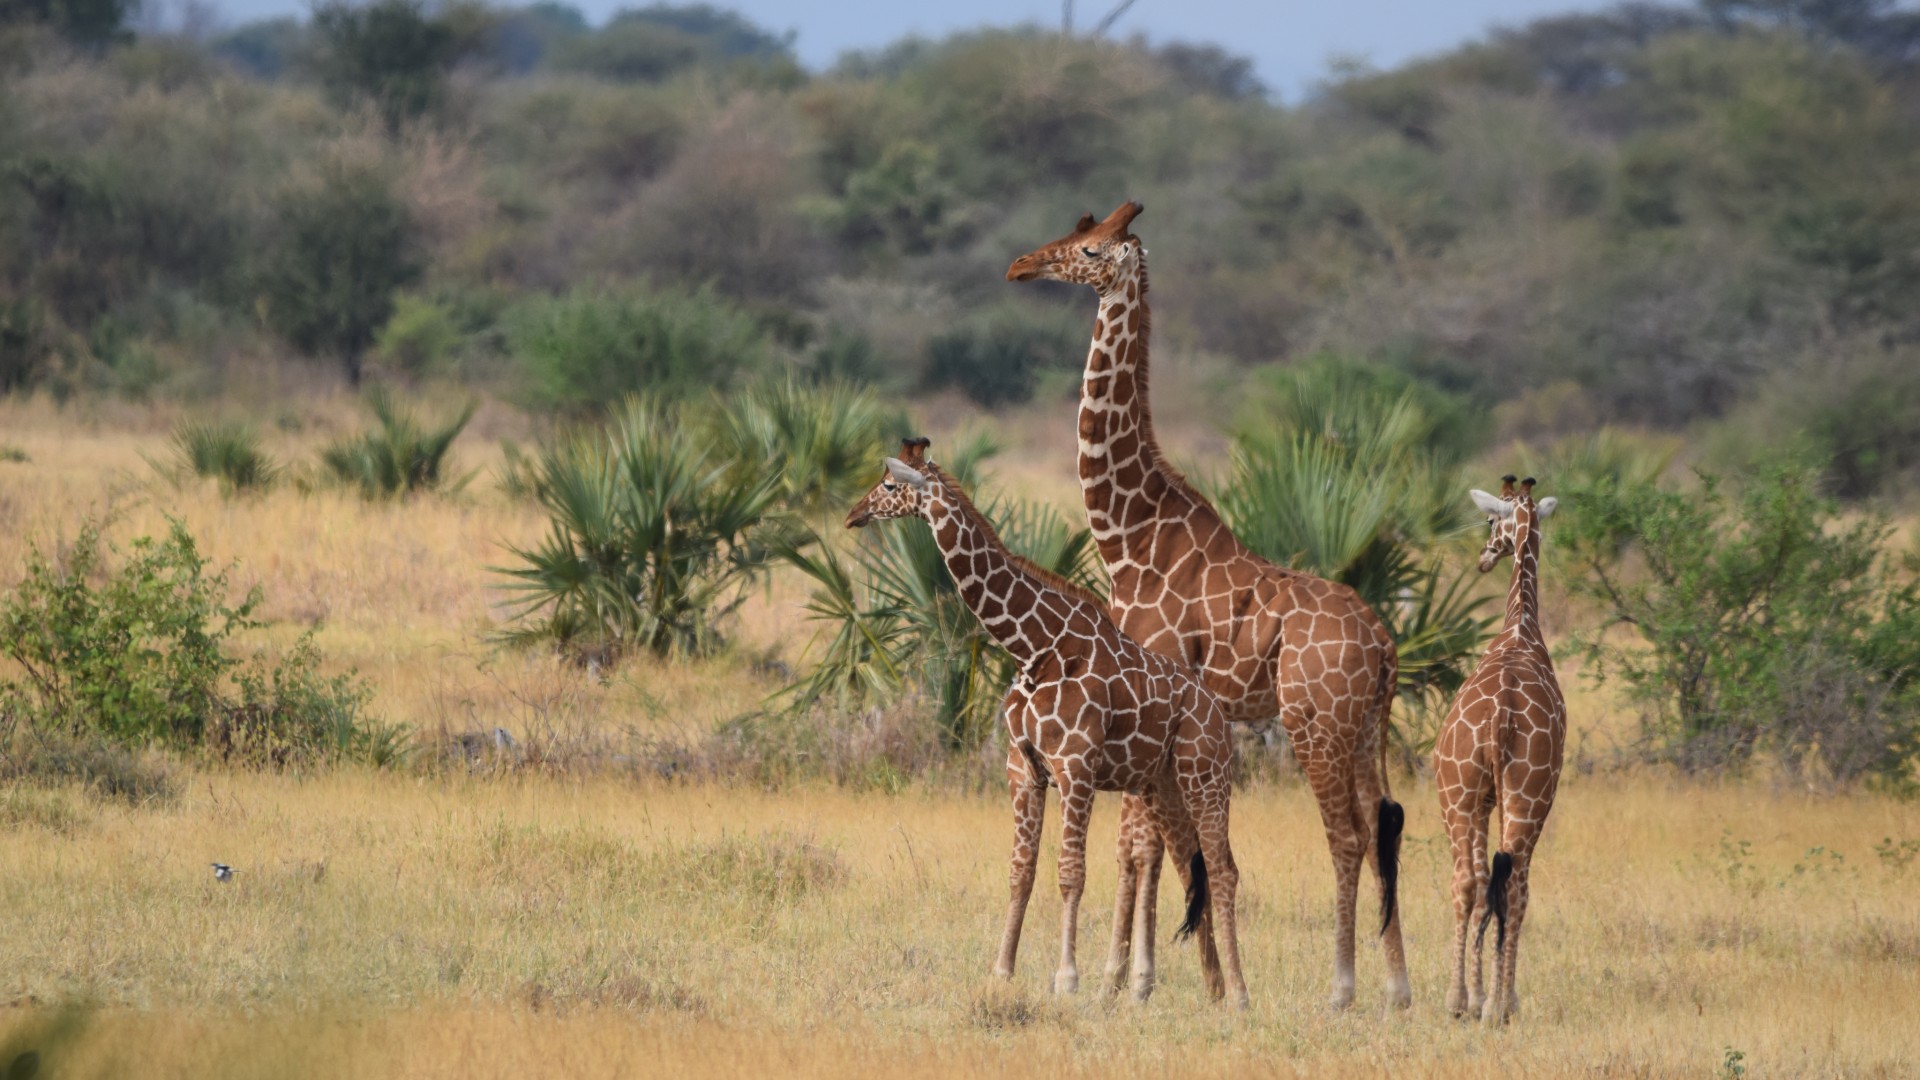 A group of three giraffes standing in the savannah